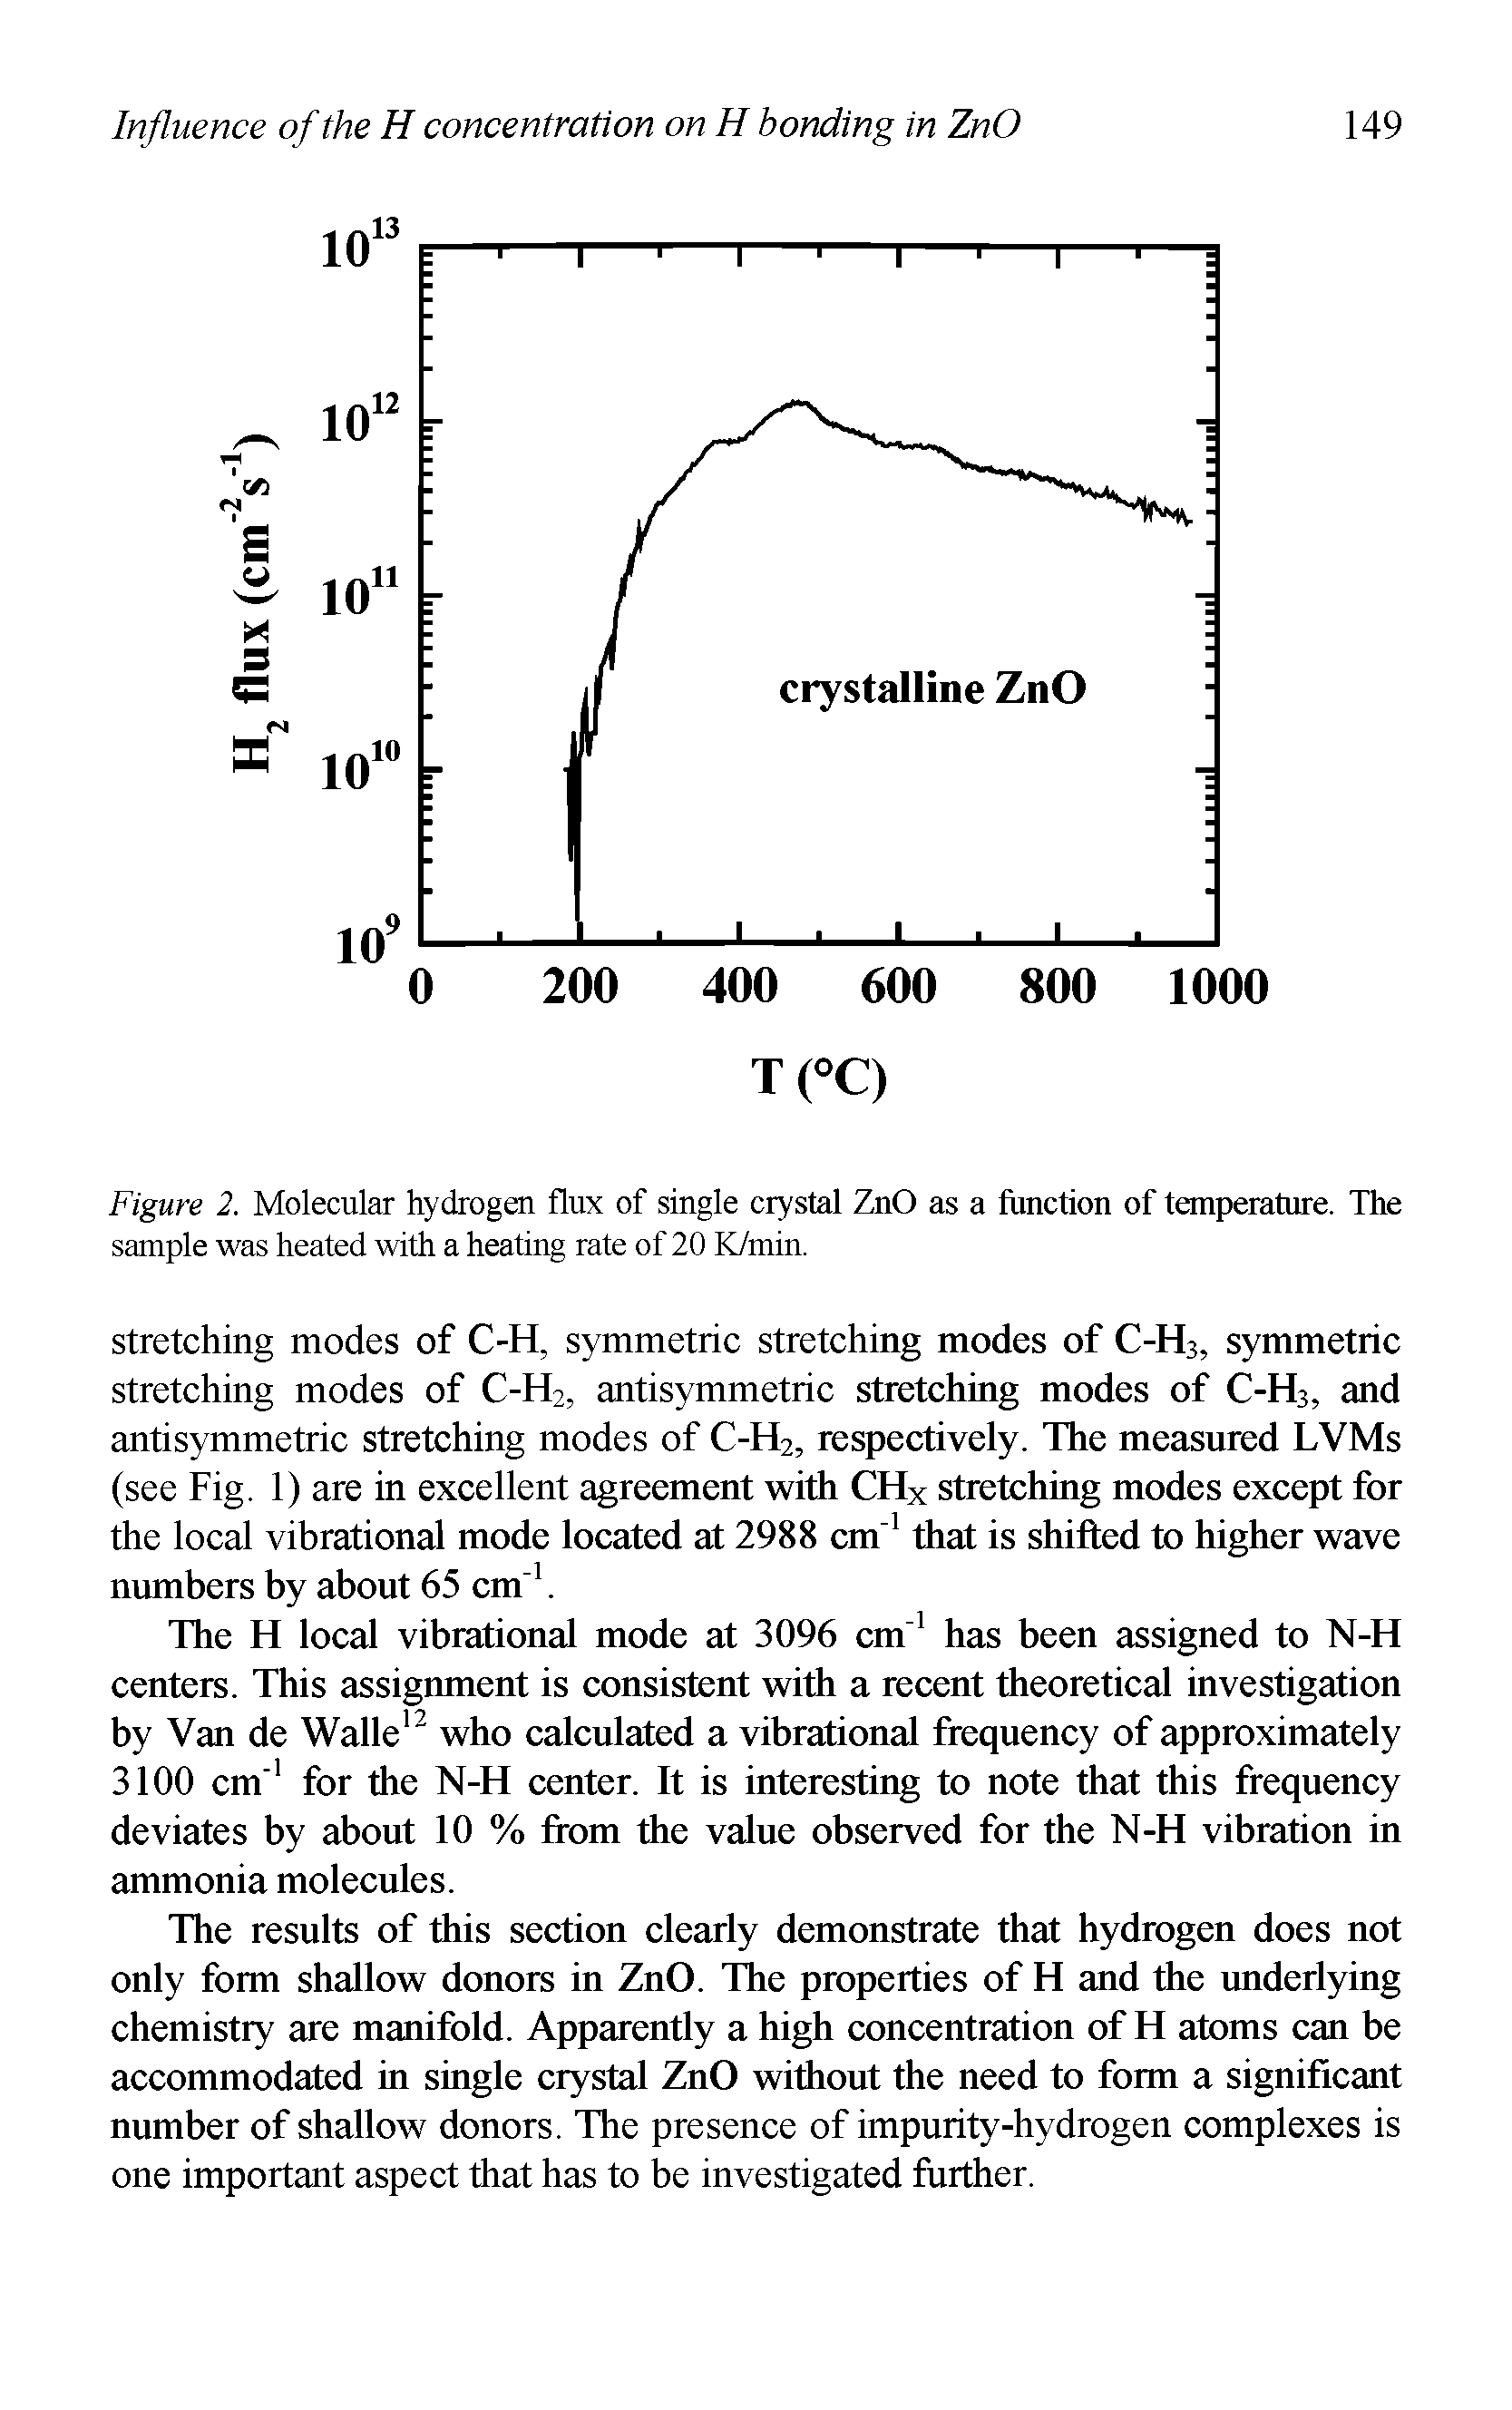 Figure 2. Molecular hydrogen flux of single crystal ZnO as a function of temperature. The sample was heated with a heating rate of 20 K/min.